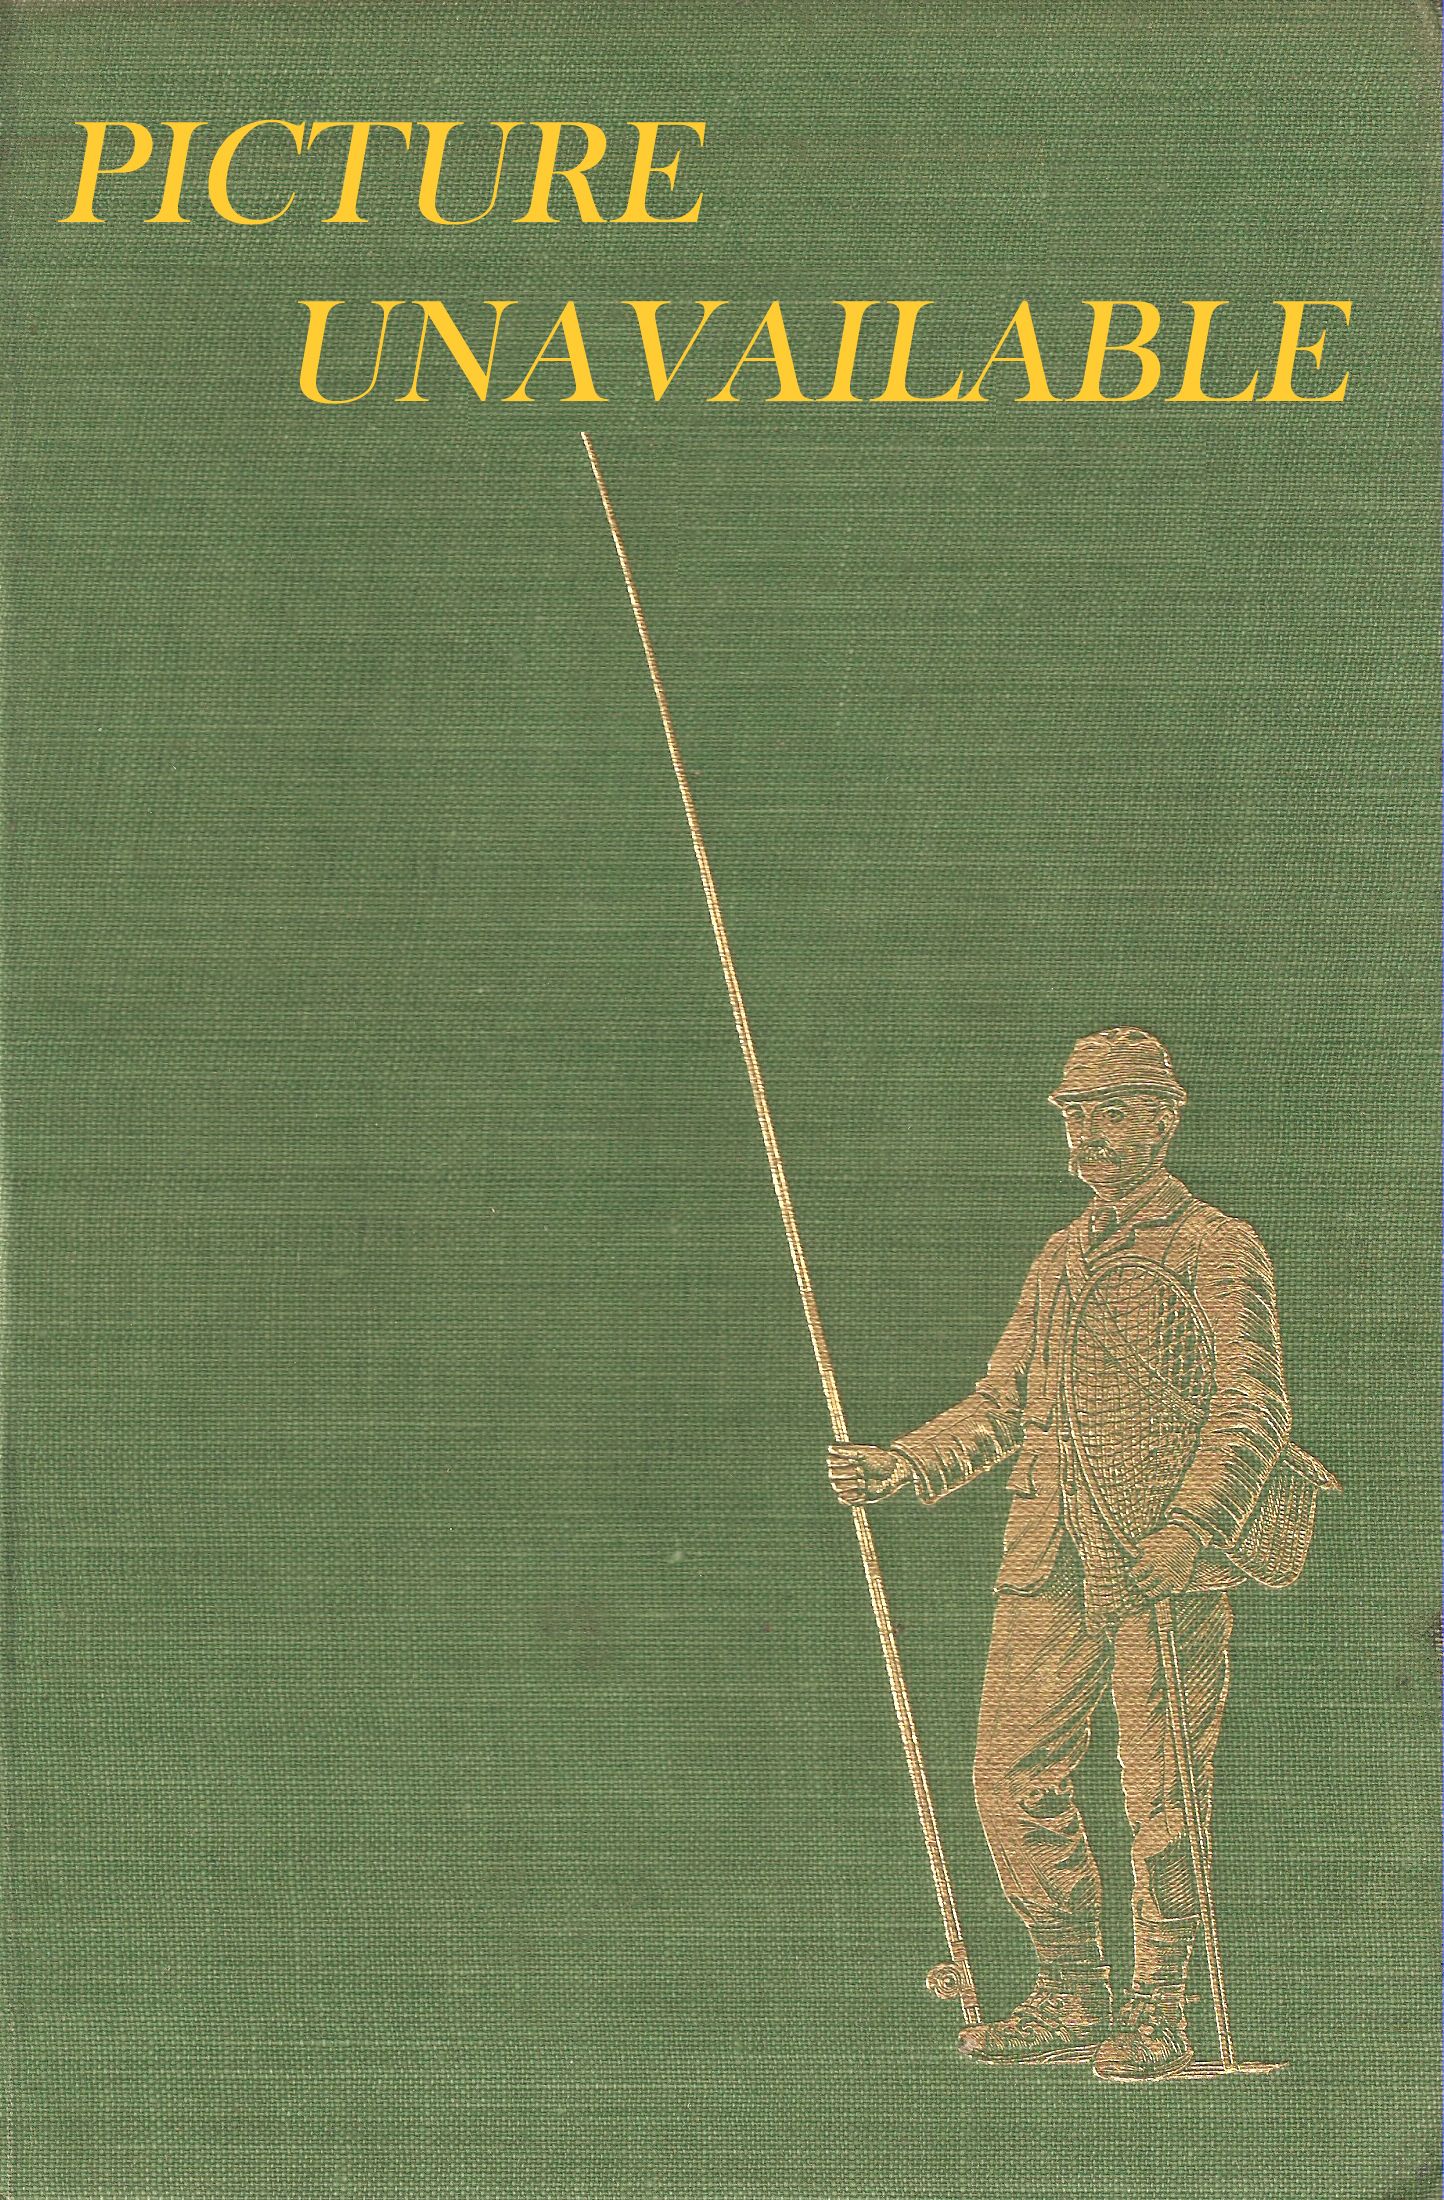 A FLY FISHER'S LIFE. By Charles Ritz. Second English Edition, 1965.